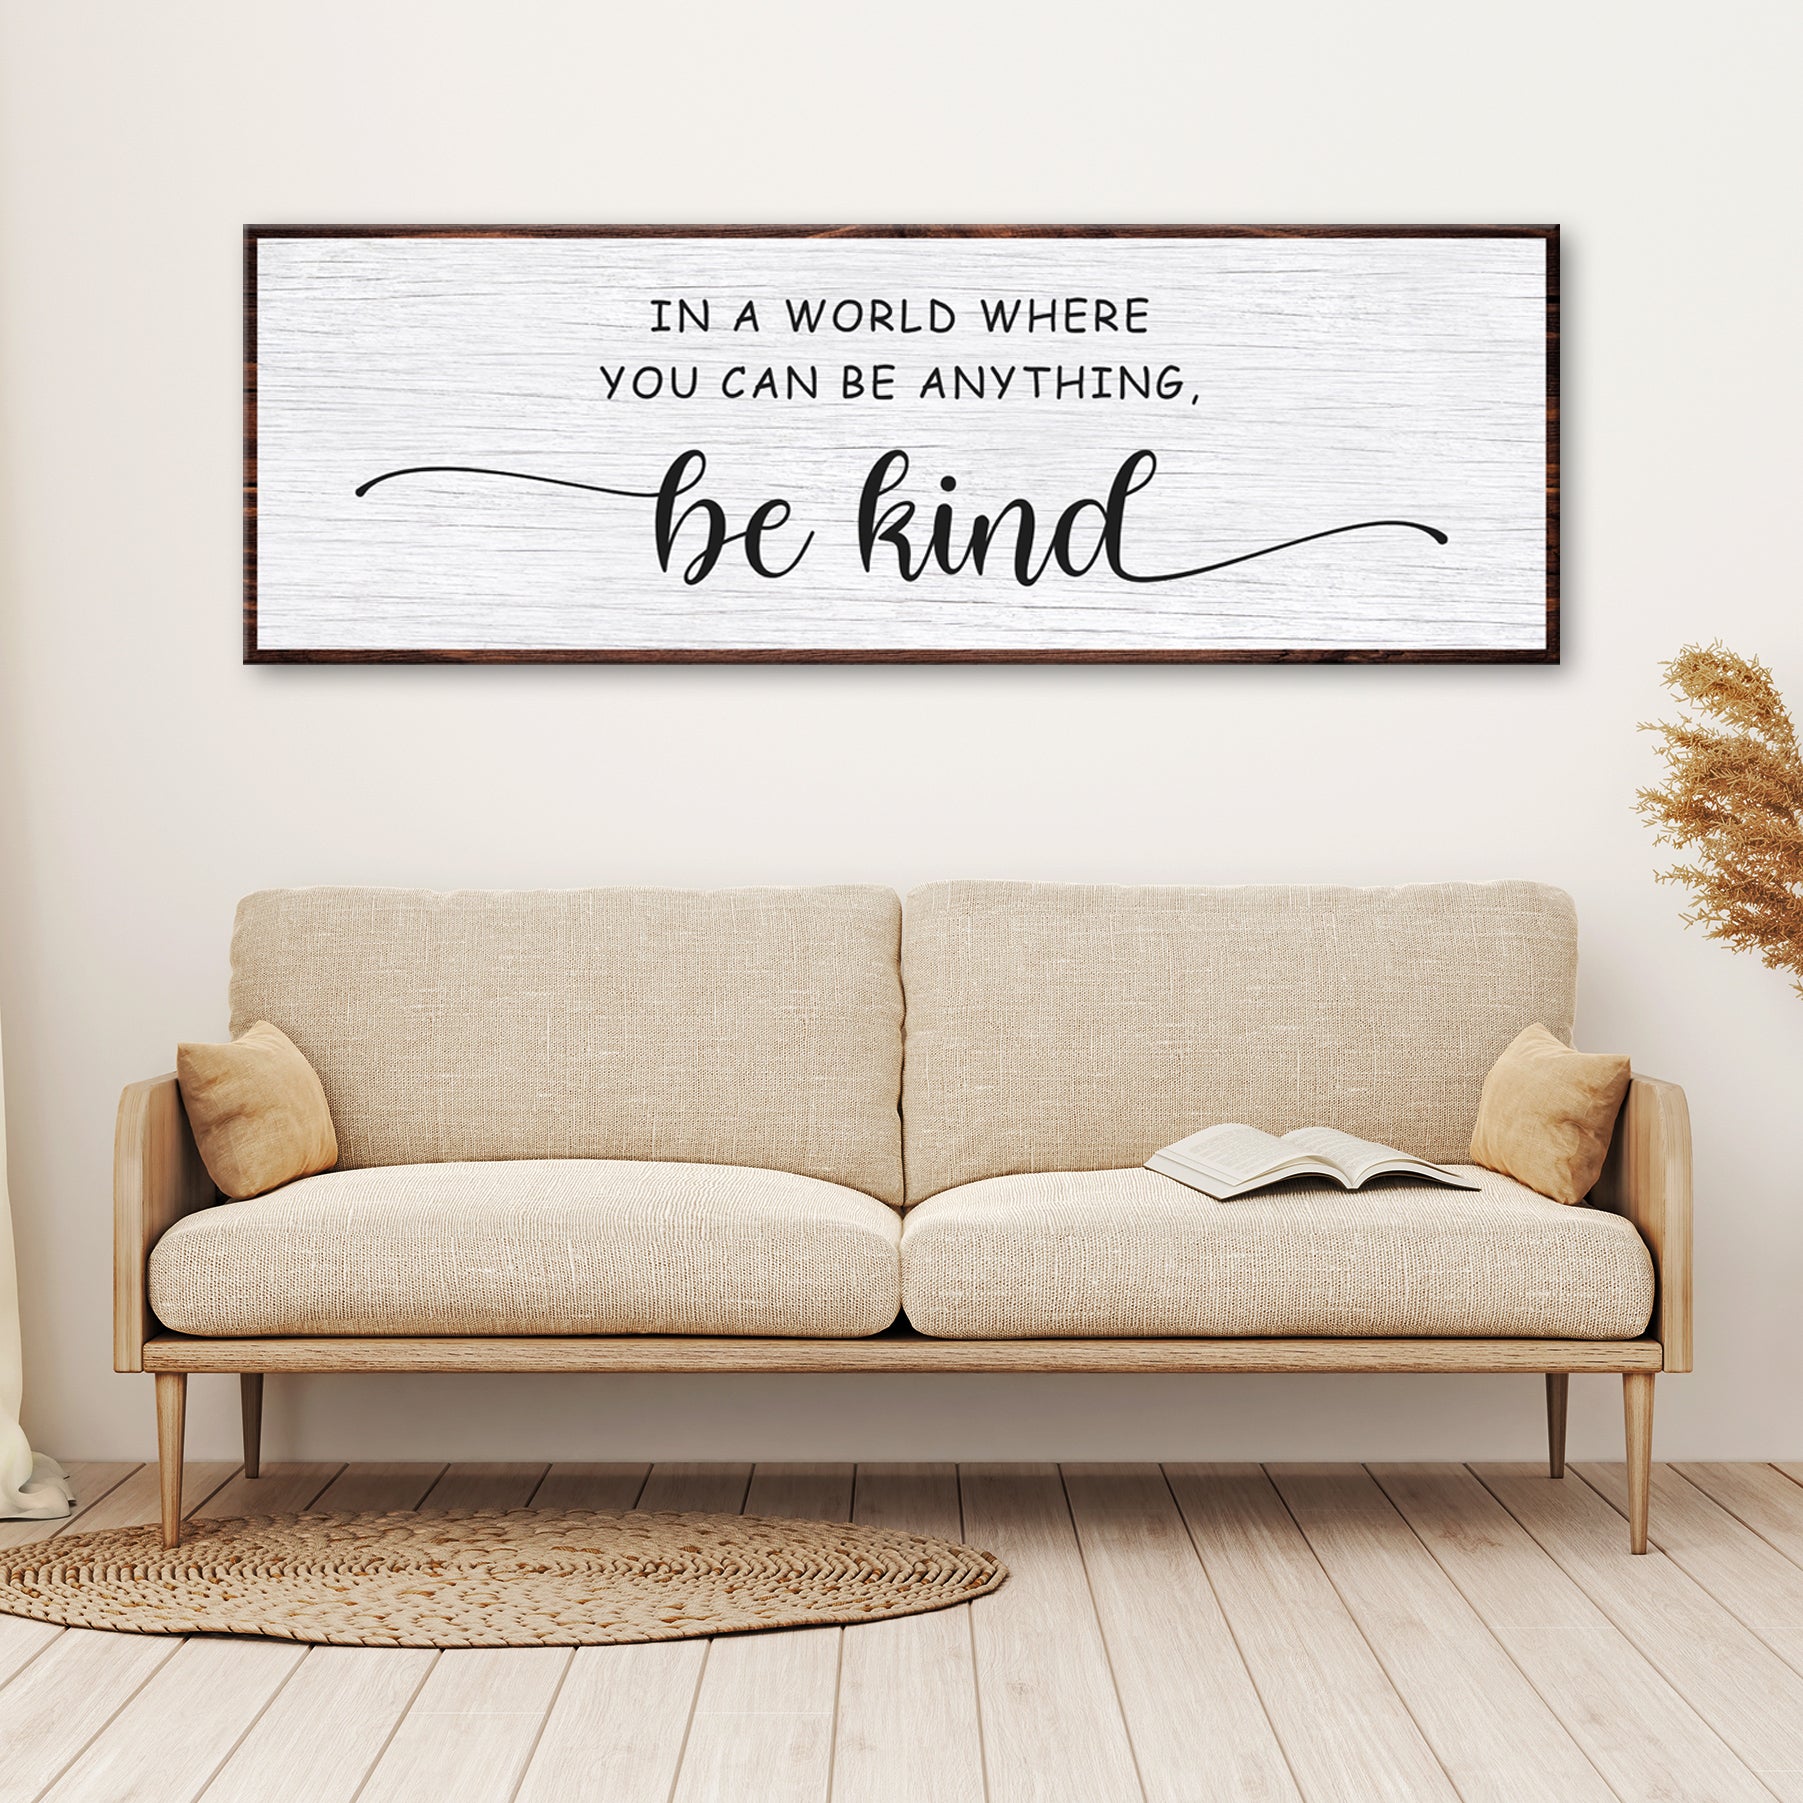 In a world where you can be anything, Be Kind Sign - Image by Tailored Canvases